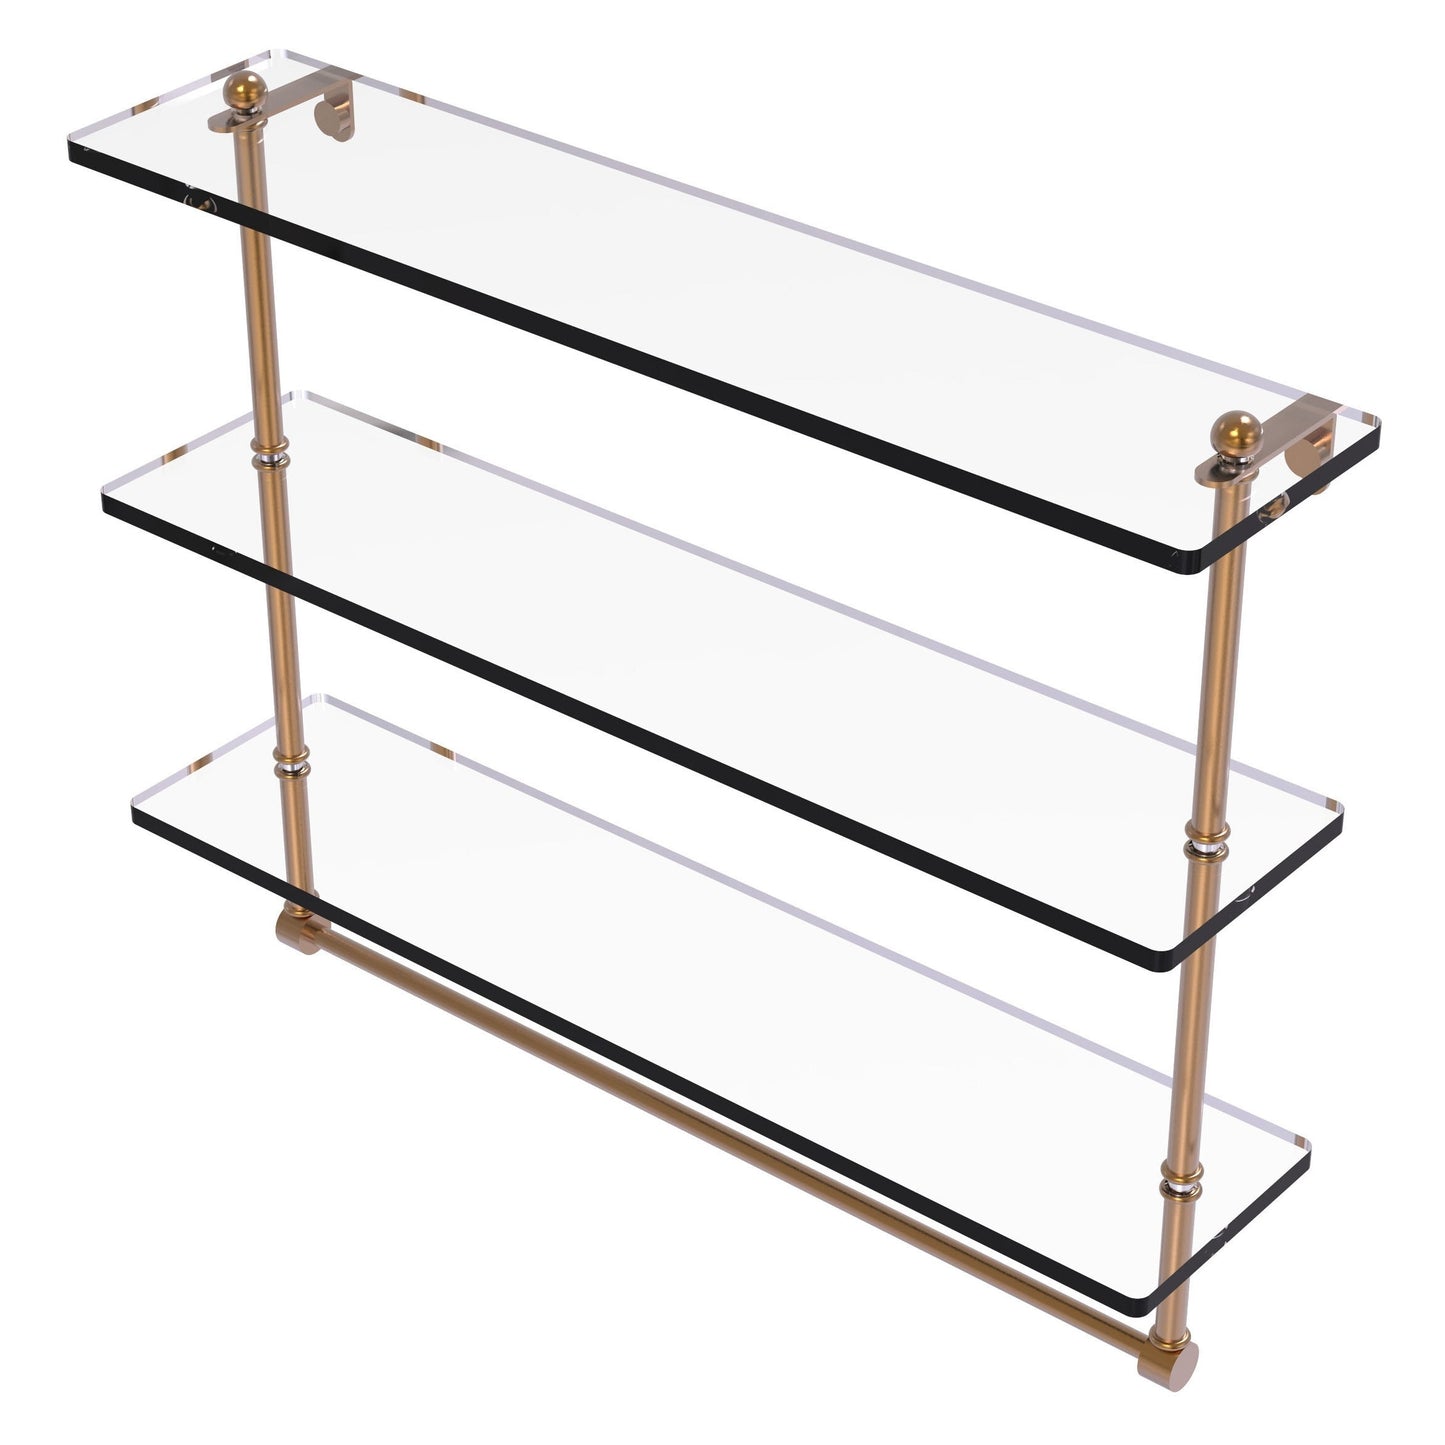 Allied Brass Prestige Regal 22" x 5" Brushed Bronze Solid Brass 22-Inch Triple Tiered Glass Shelf With Integrated Towel Bar